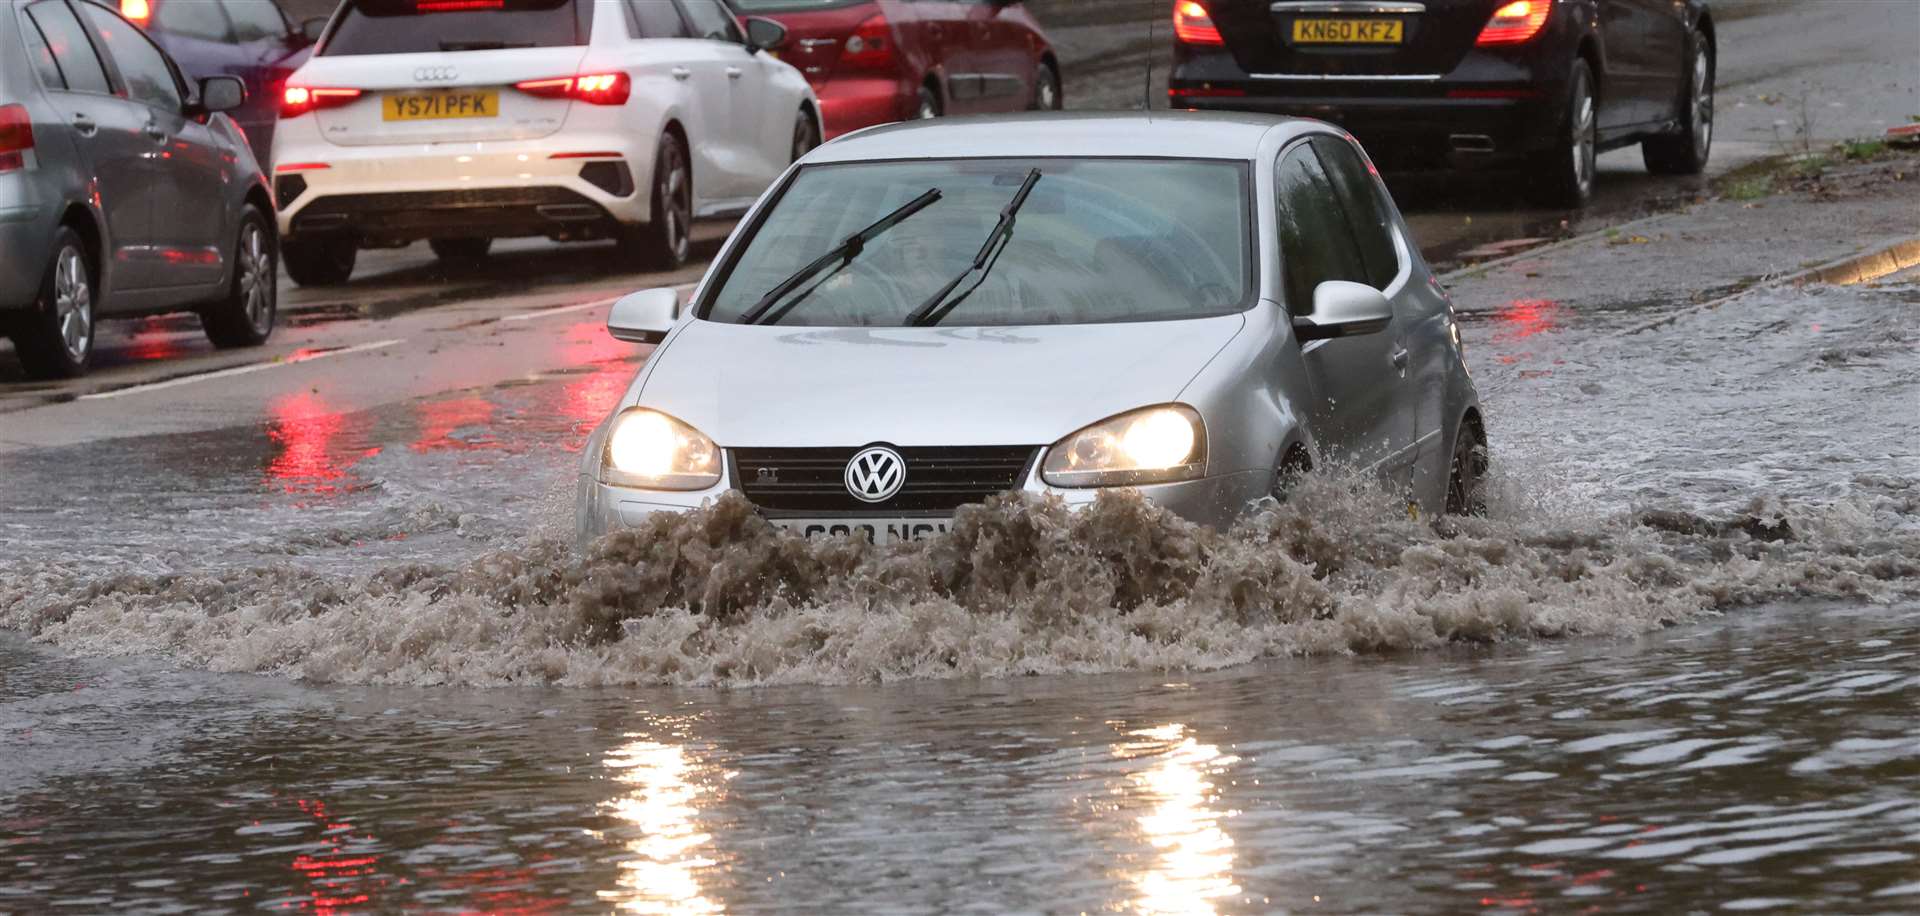 The Environment Agency has warned people to be careful due to incoming floods